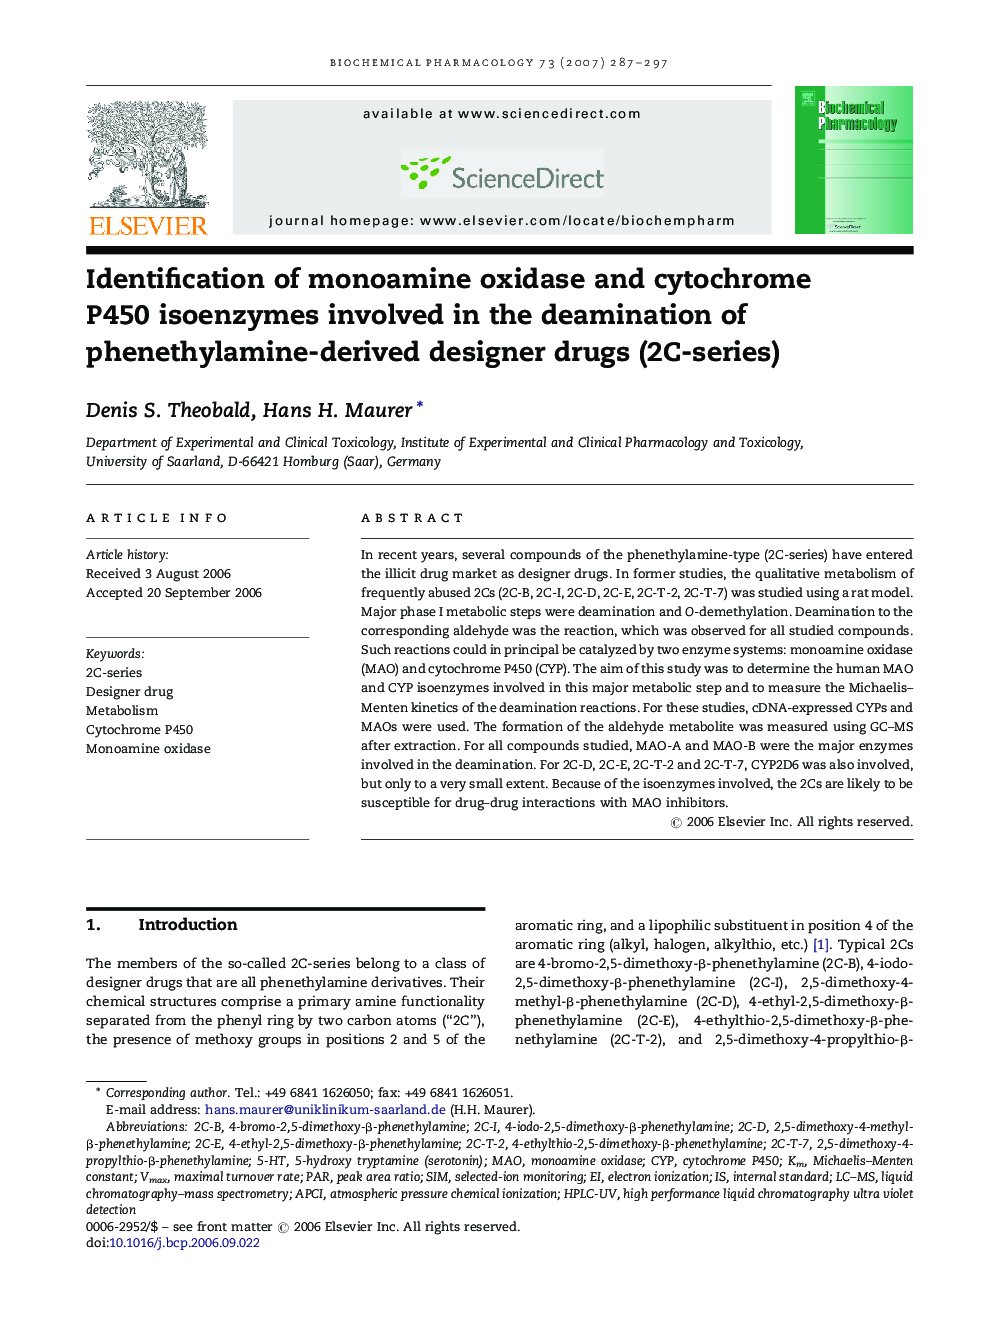 Identification of monoamine oxidase and cytochrome P450 isoenzymes involved in the deamination of phenethylamine-derived designer drugs (2C-series)